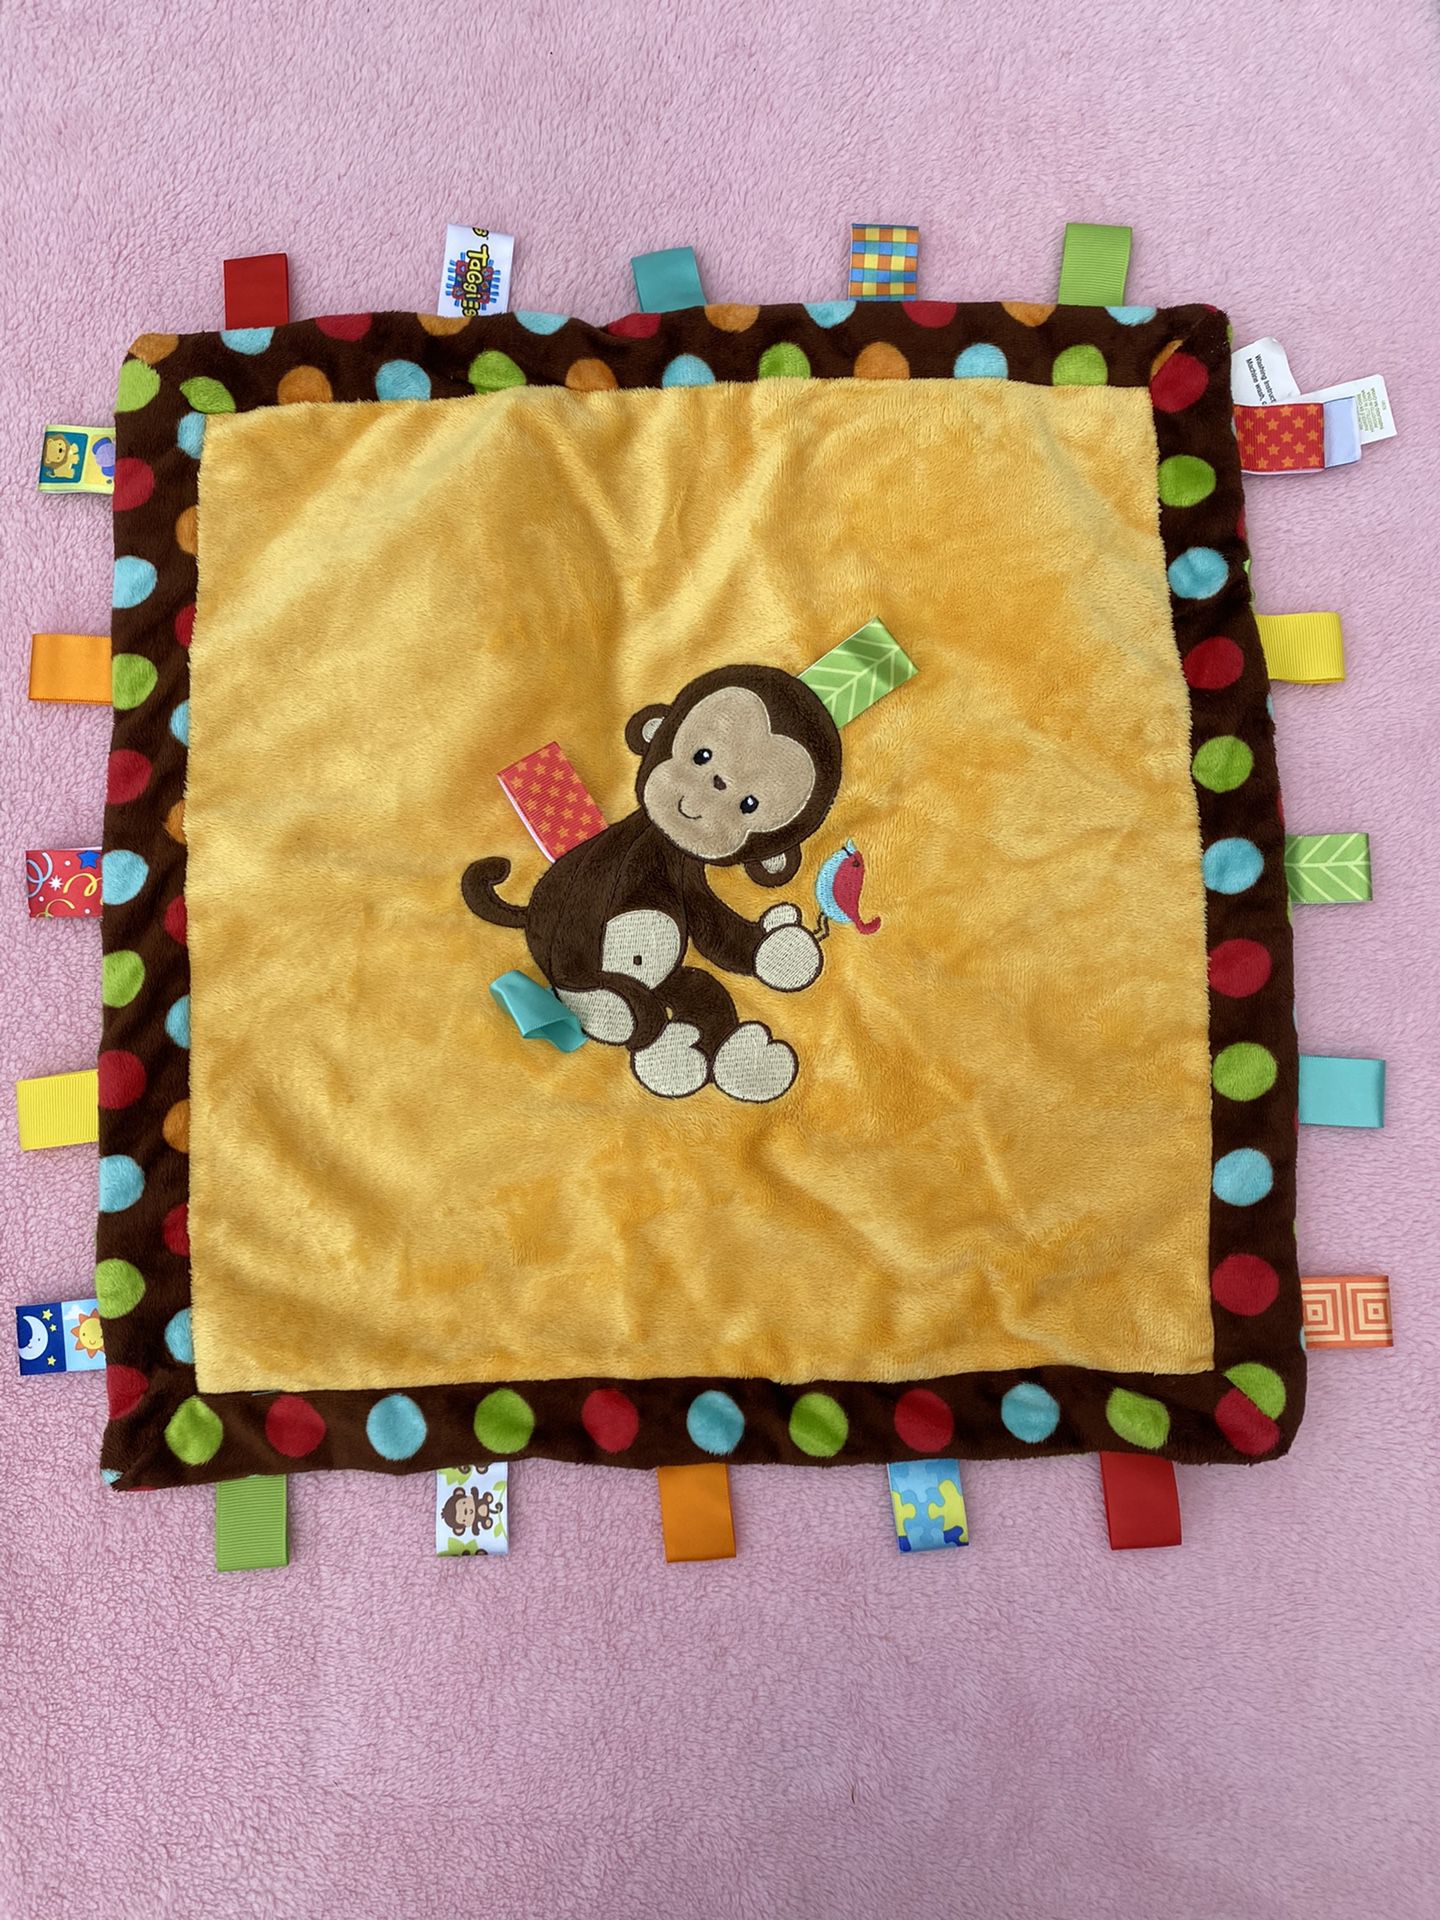 SECURITY Blanket TAGGIES Flat MONKEY Yellow Velour Brown Satin Lovey Tag Toy